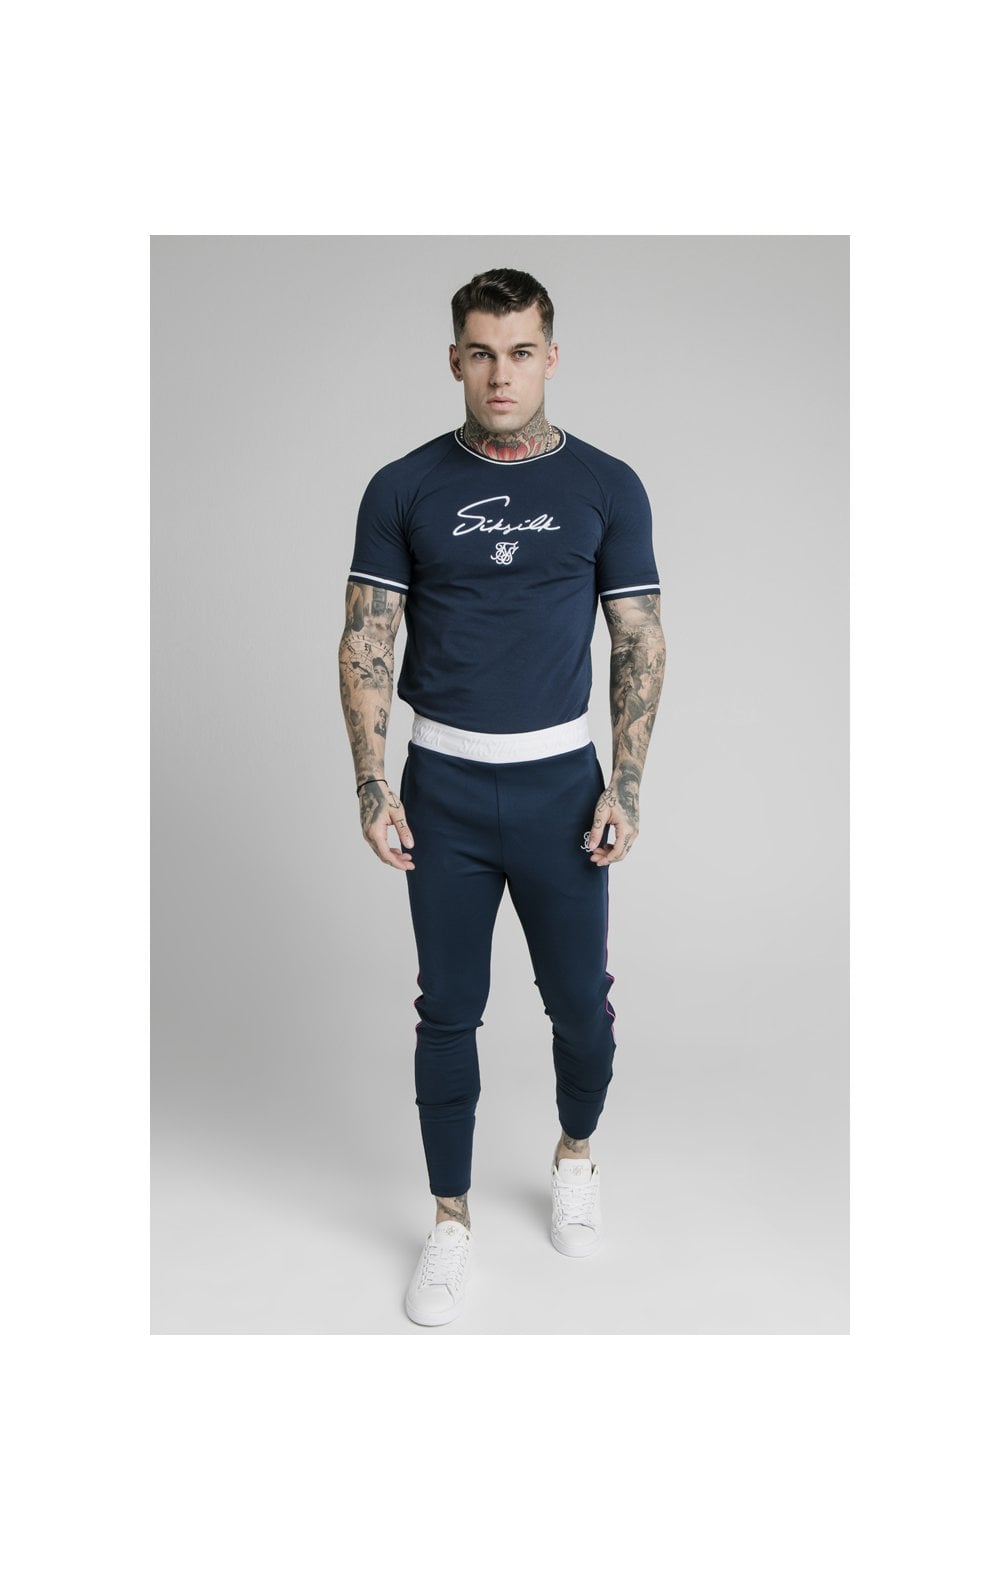 Load image into Gallery viewer, SikSilk Athlete Prestige Fade Track Pants - Navy (4)